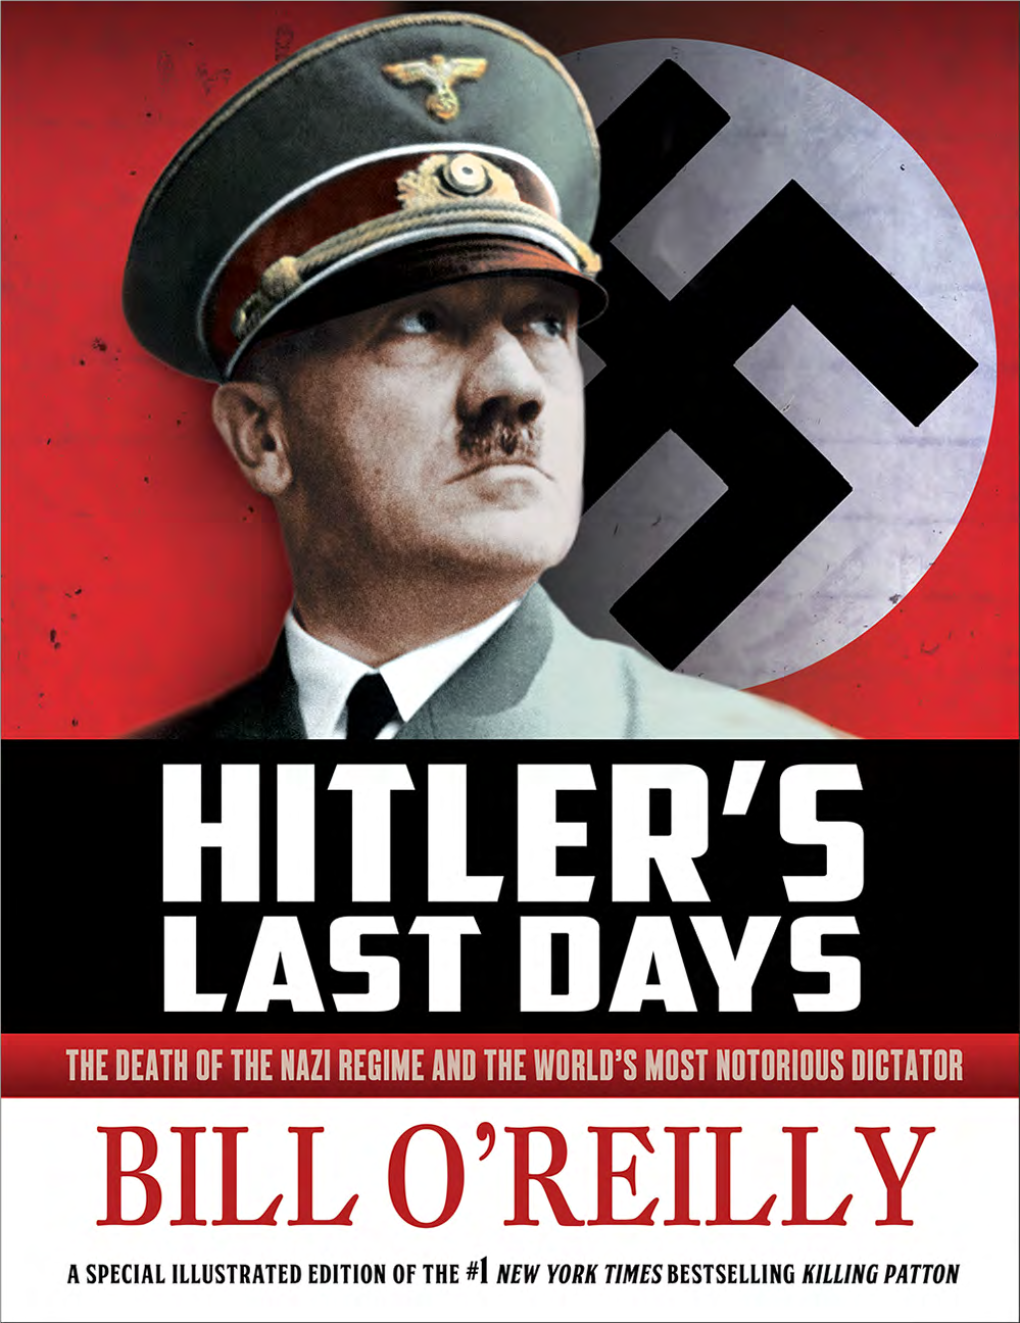 Hitlers-Last-Days-By-Bill-Oreilly-Excerpt